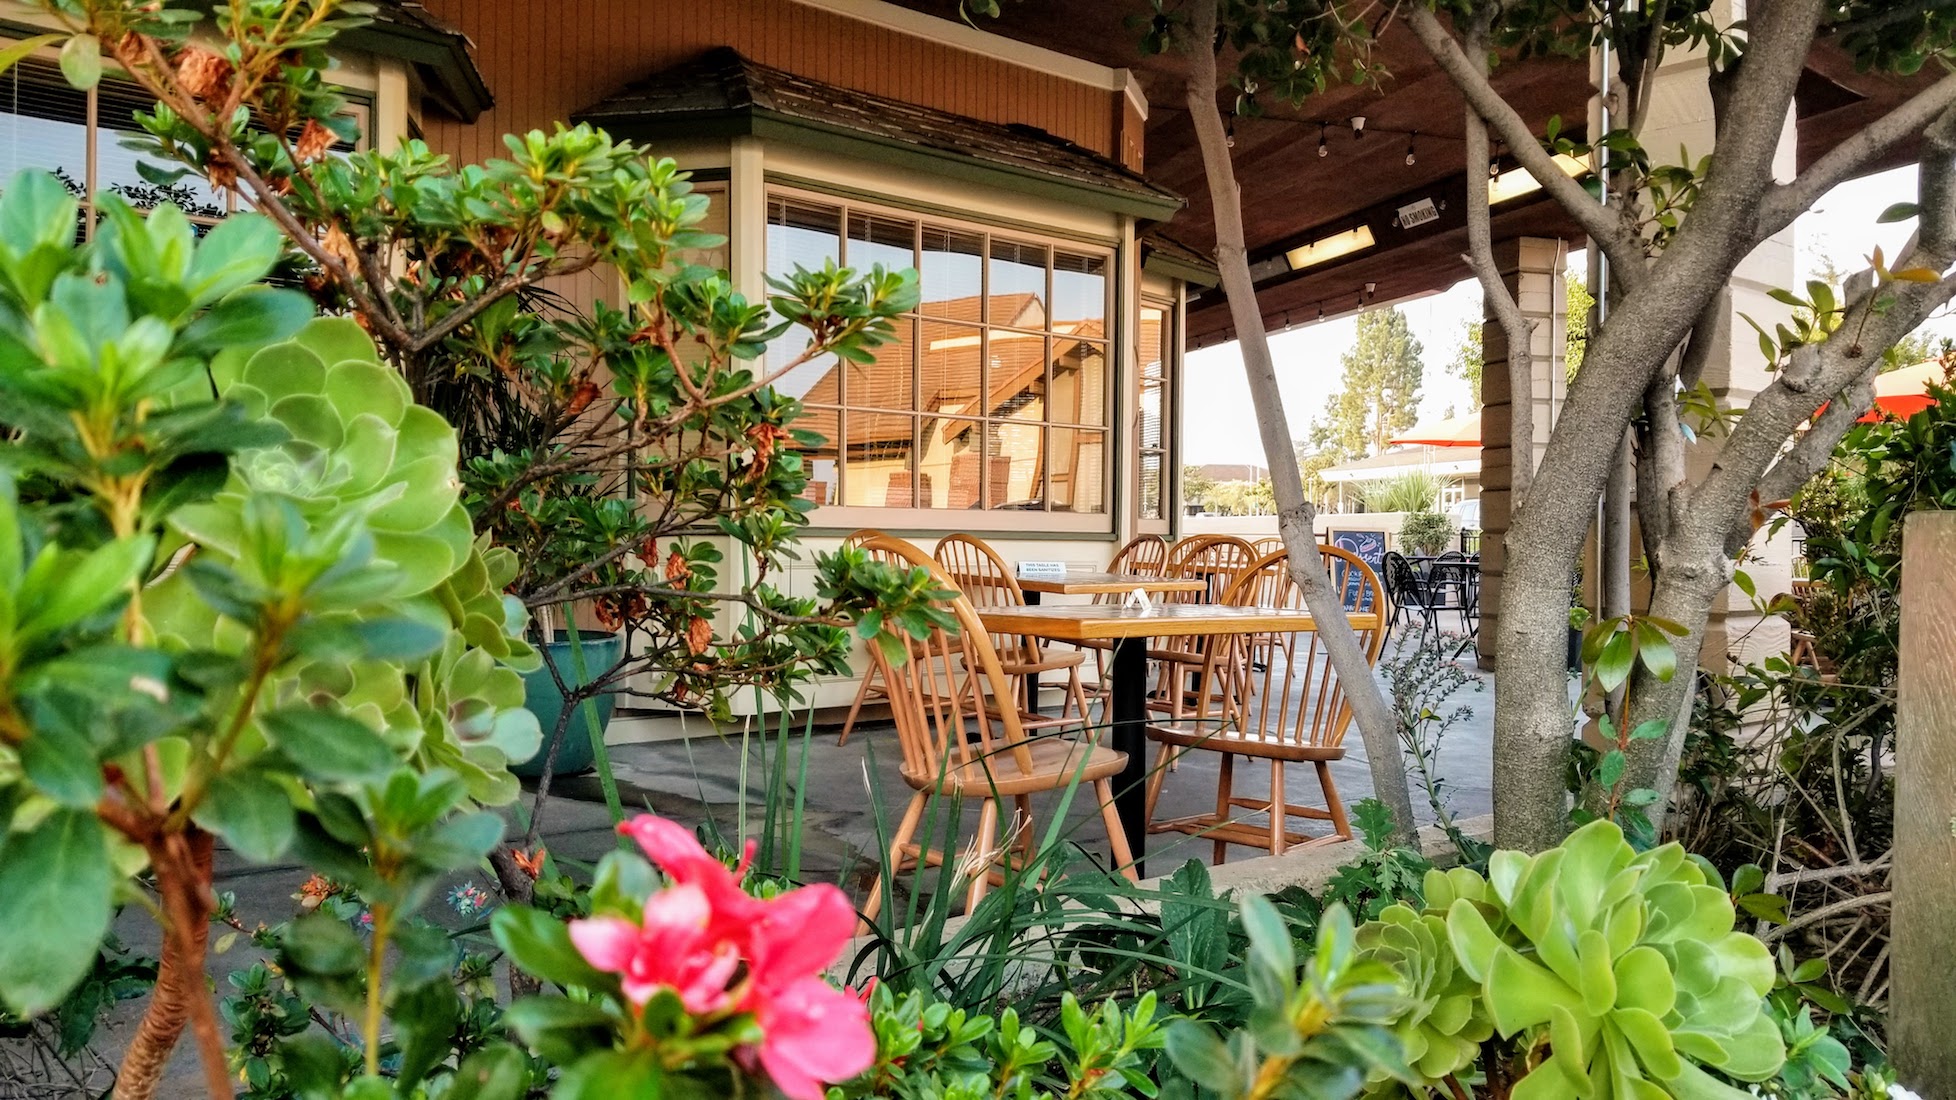 View of outdoor patio seating with tables and umbrellas at Country Gourmet restaurant in Sunnyvale.